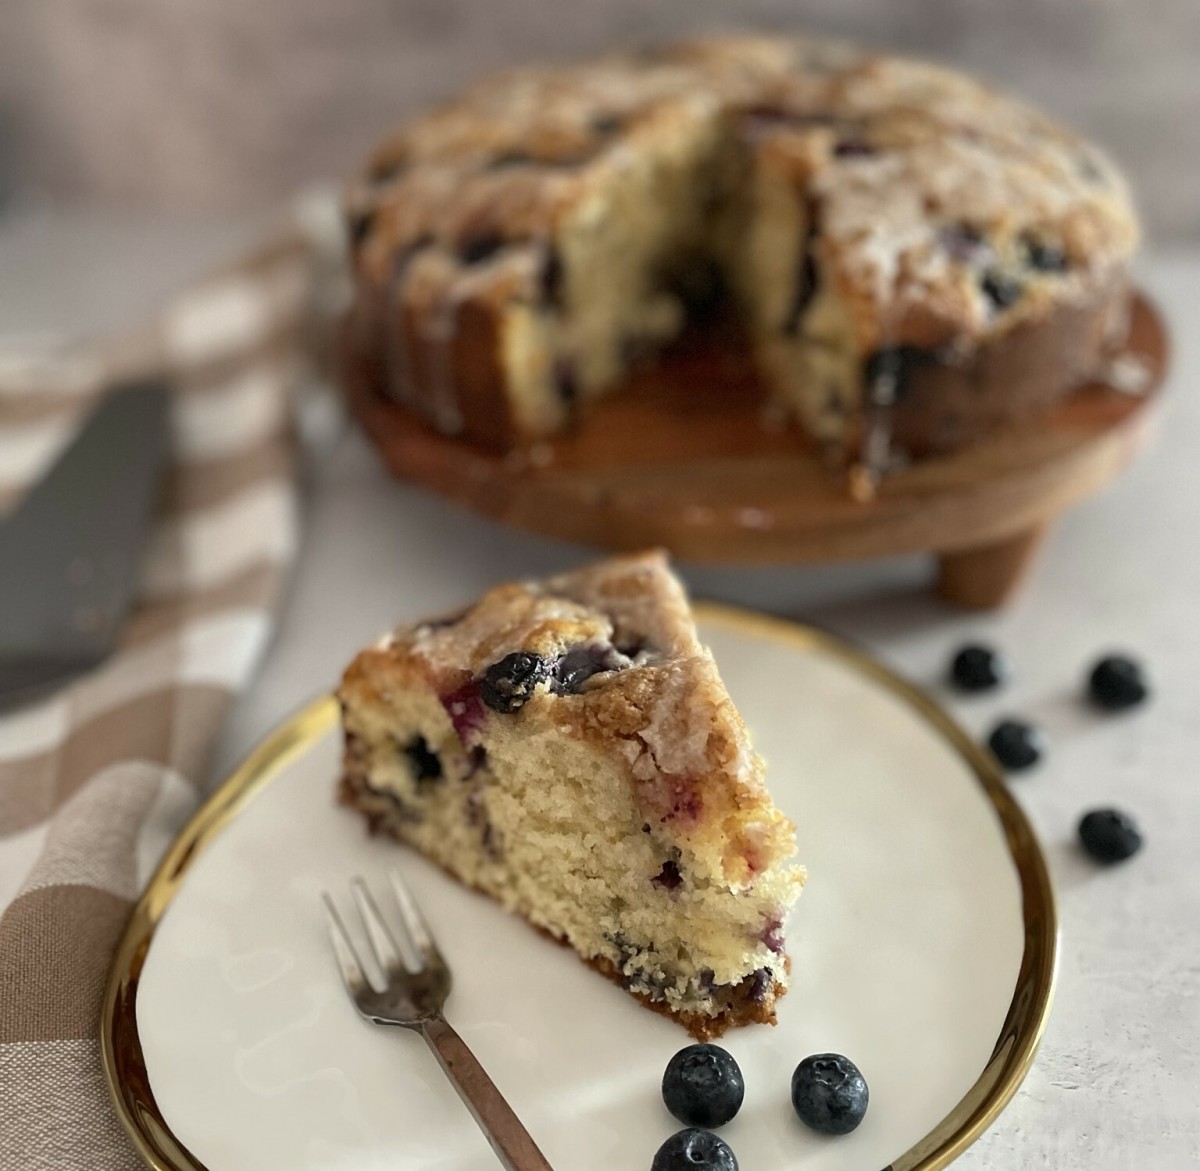 How to Make Delicious Blueberry Coffee Cake with Streusel Topping